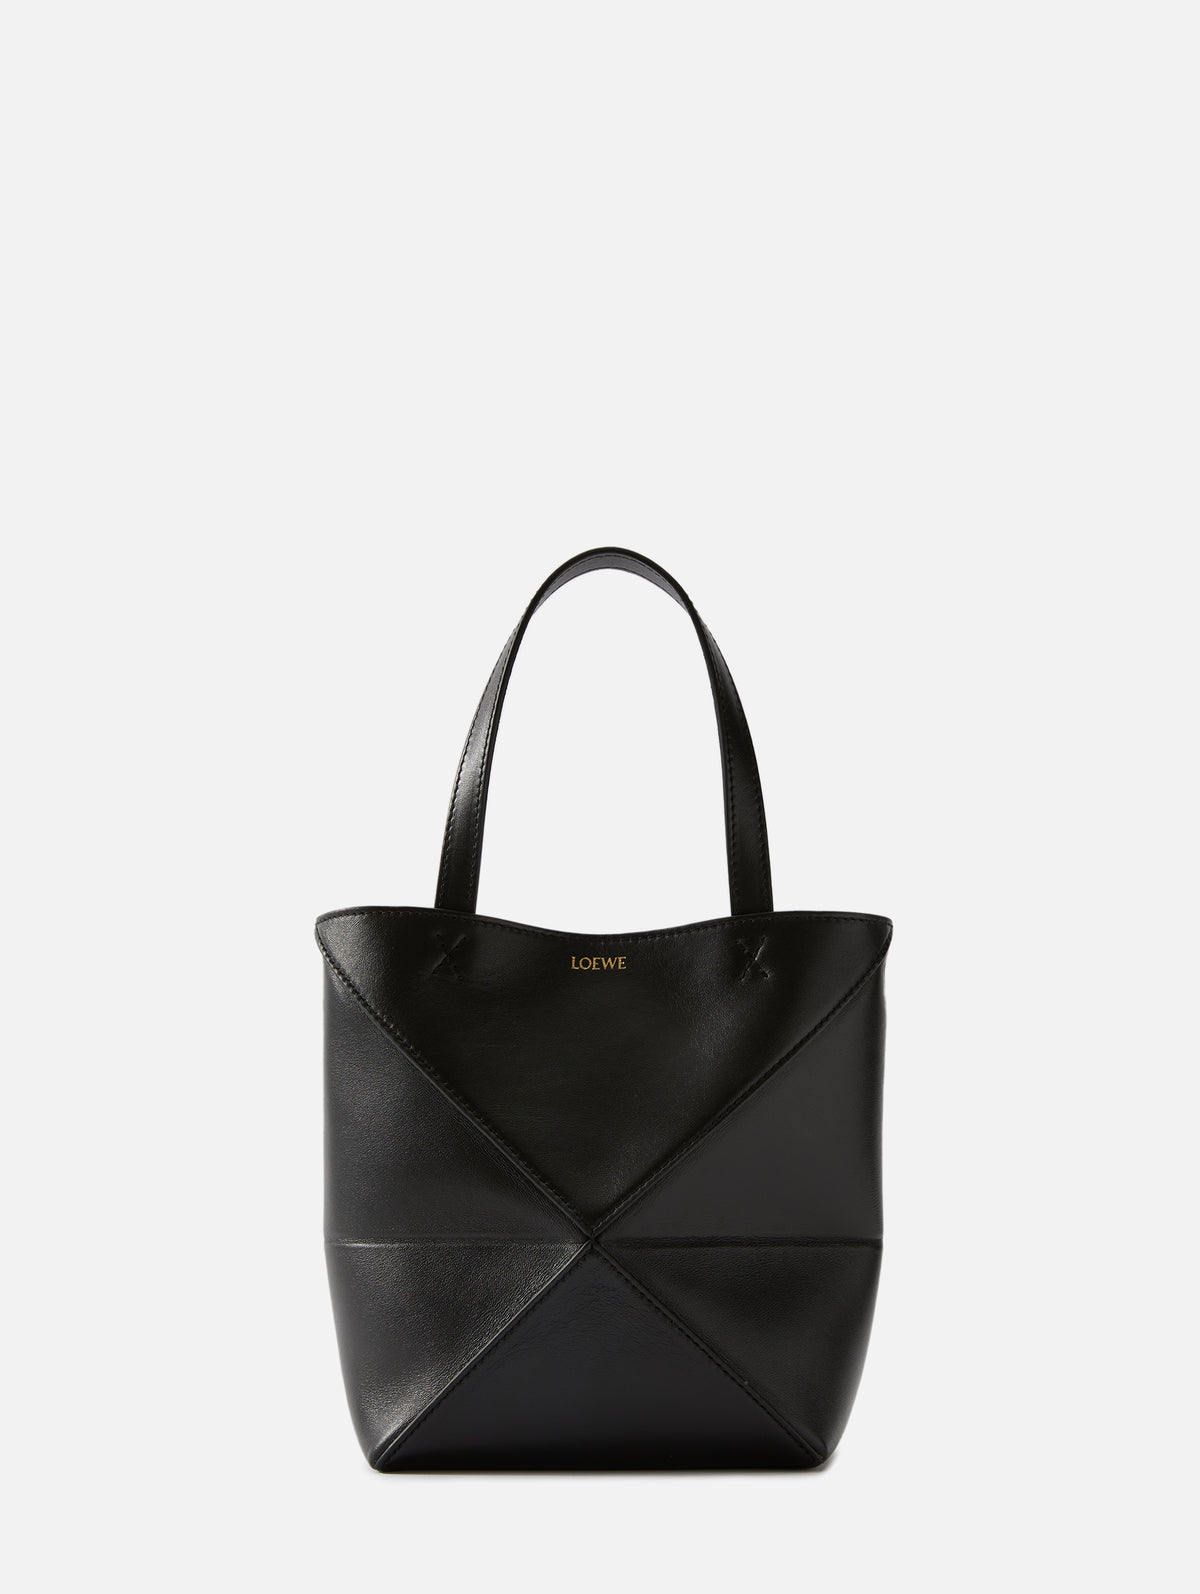 Puzzle leather mini bag by Loewe